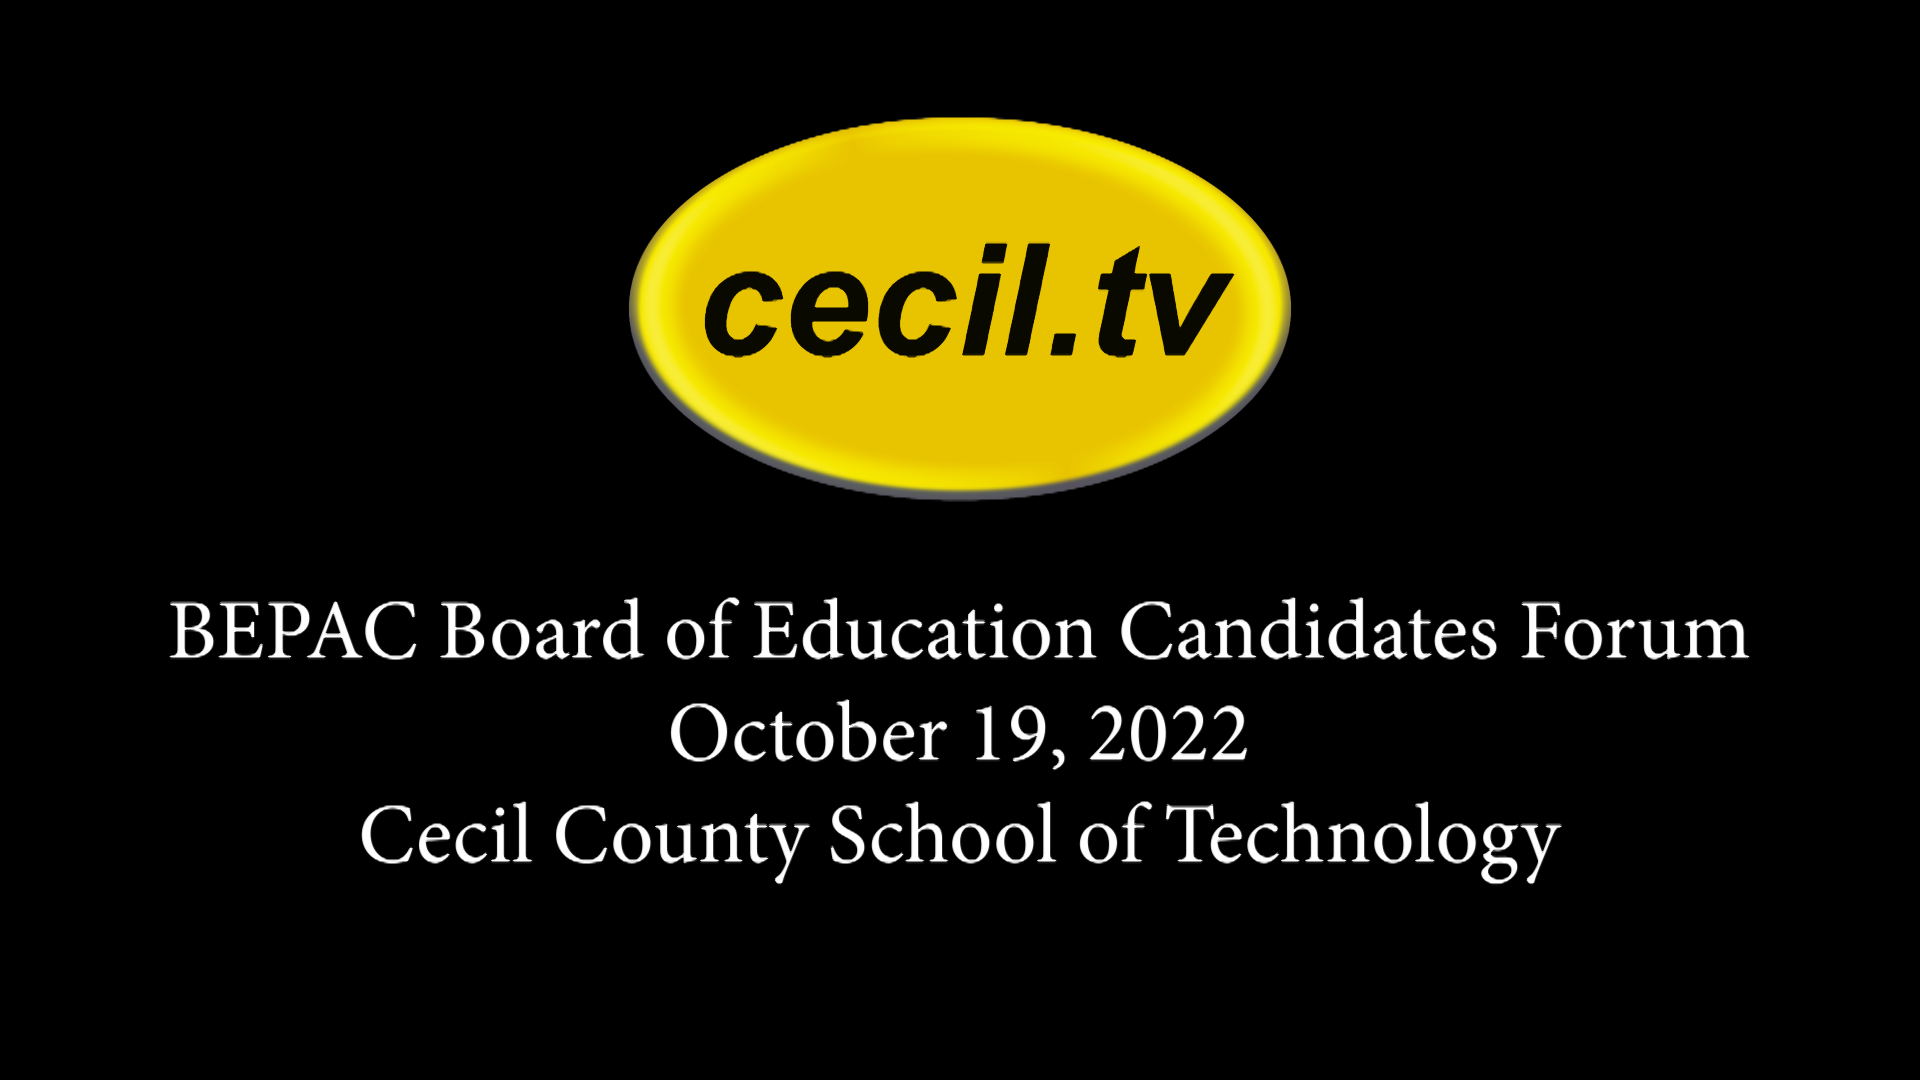 BEPAC Board of Education Candidates Forum - 2022